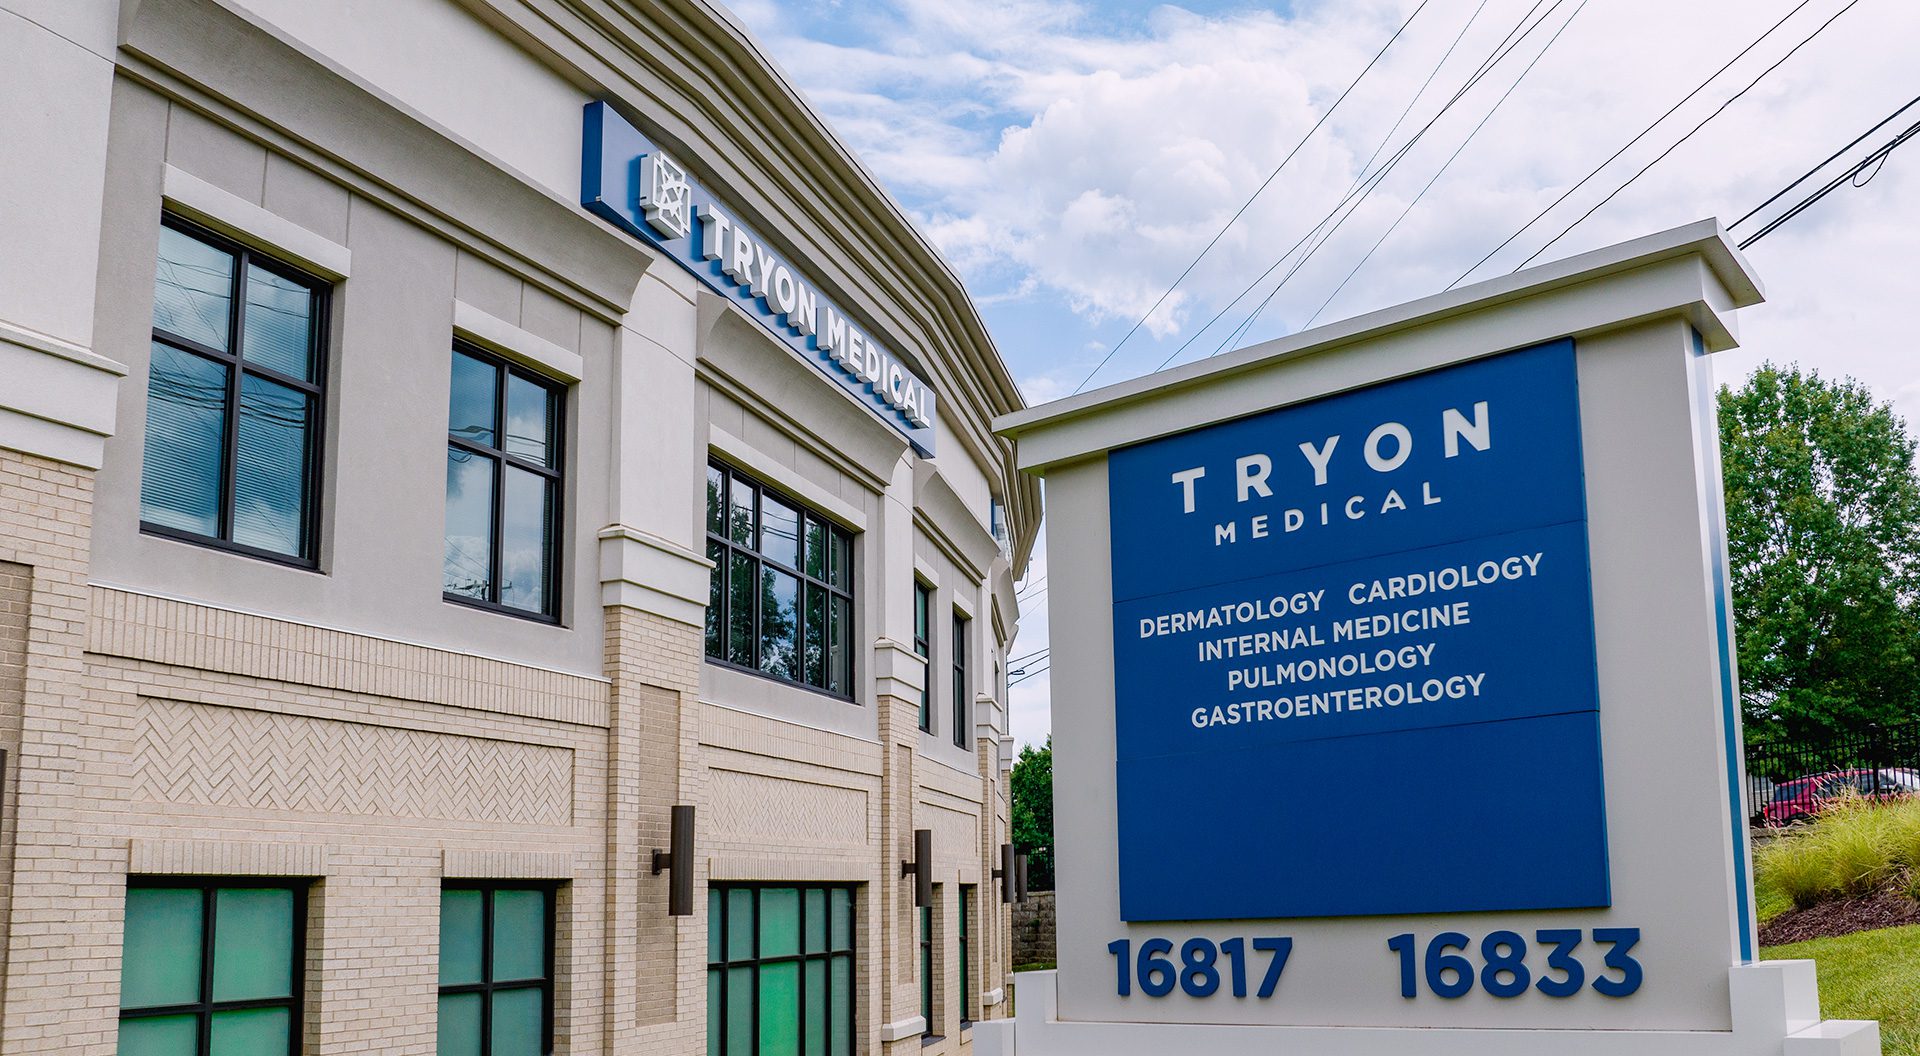 Tryon Medical Partners at Marvin Crossing center monument sign with 2-story building in background